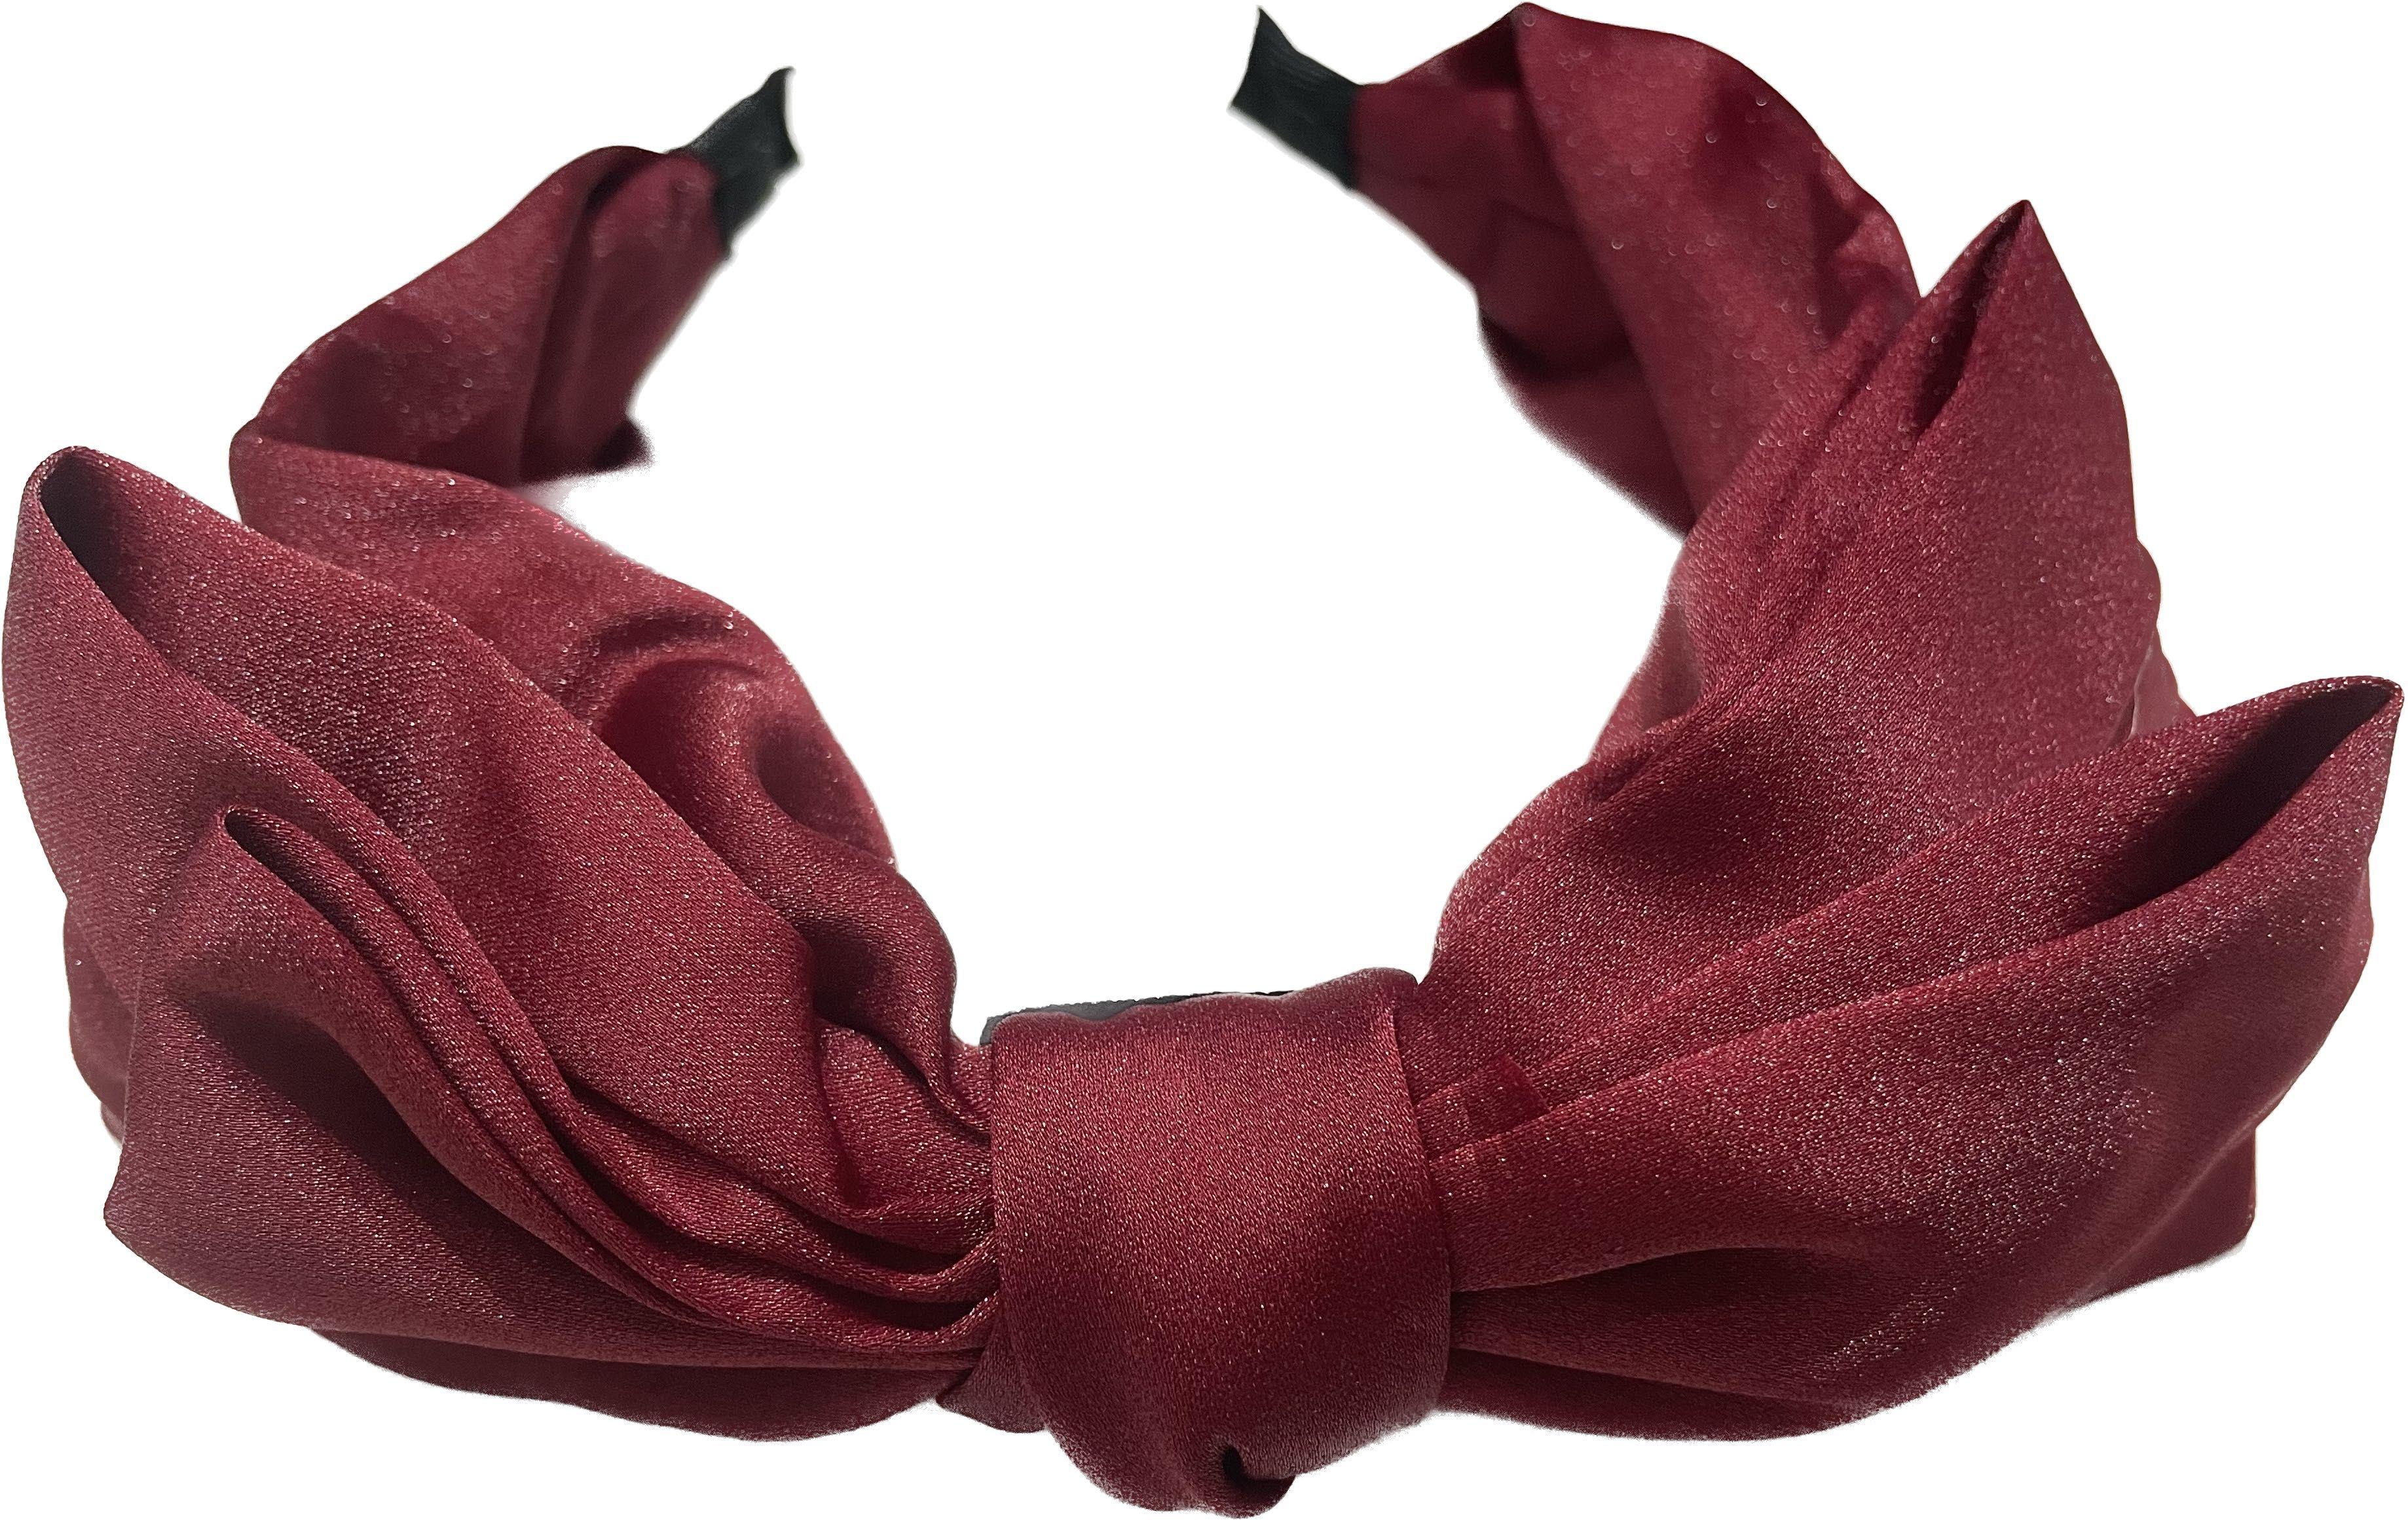 Hair band with a decorative large double BLING bow - red